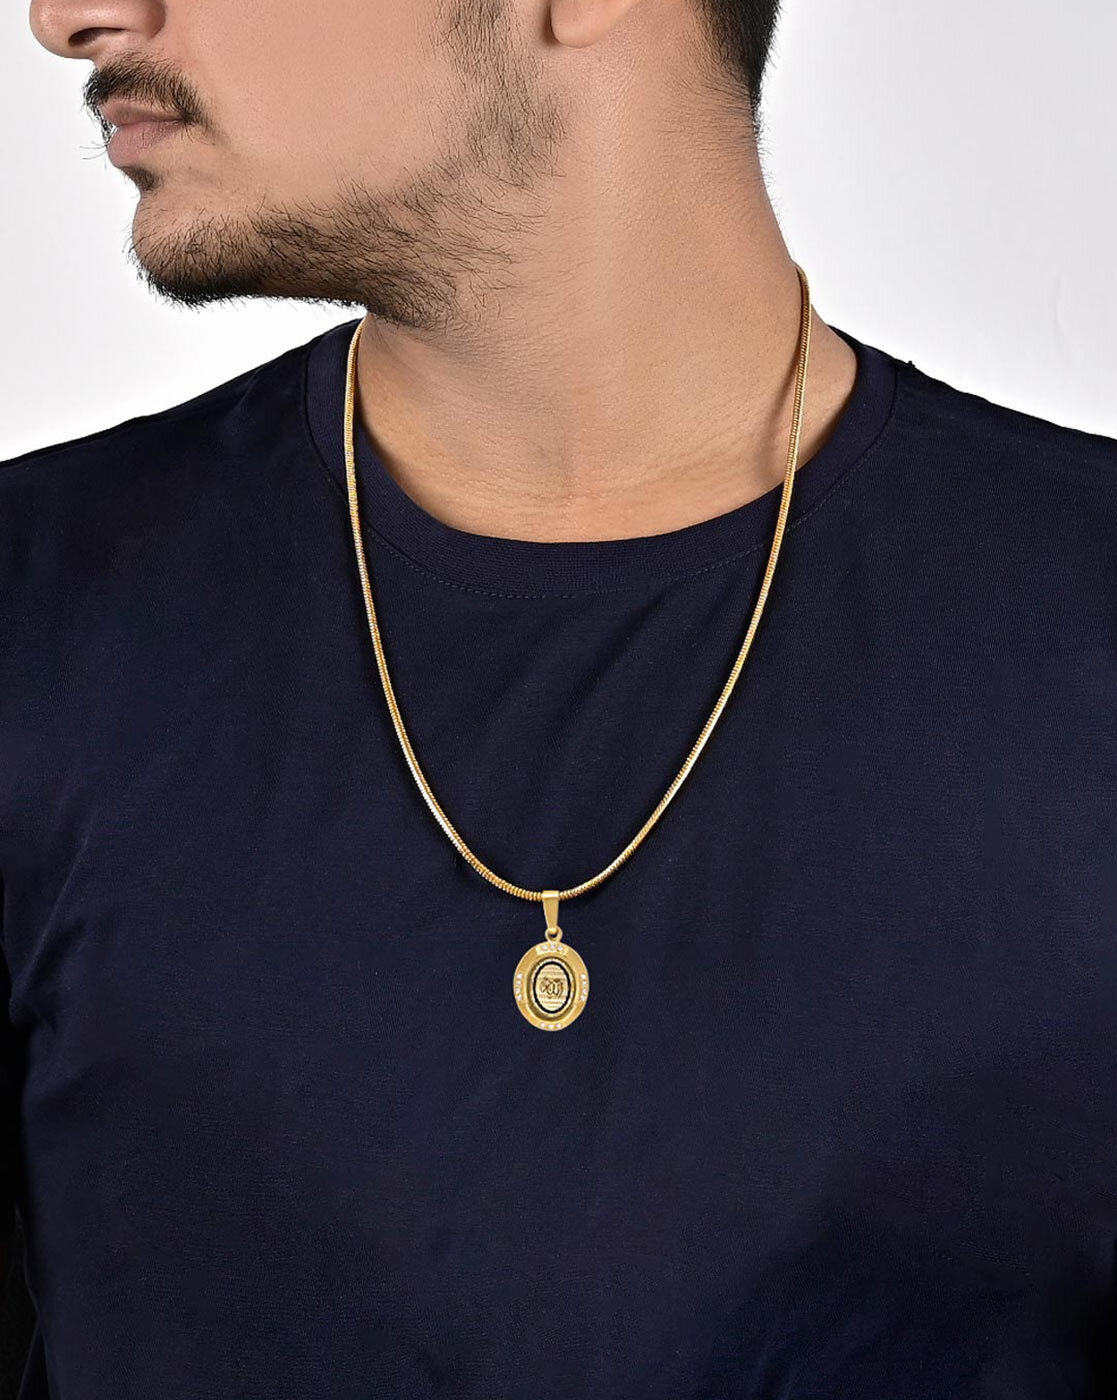 Buy Gold-Toned Chains for Men by Tistabene Online